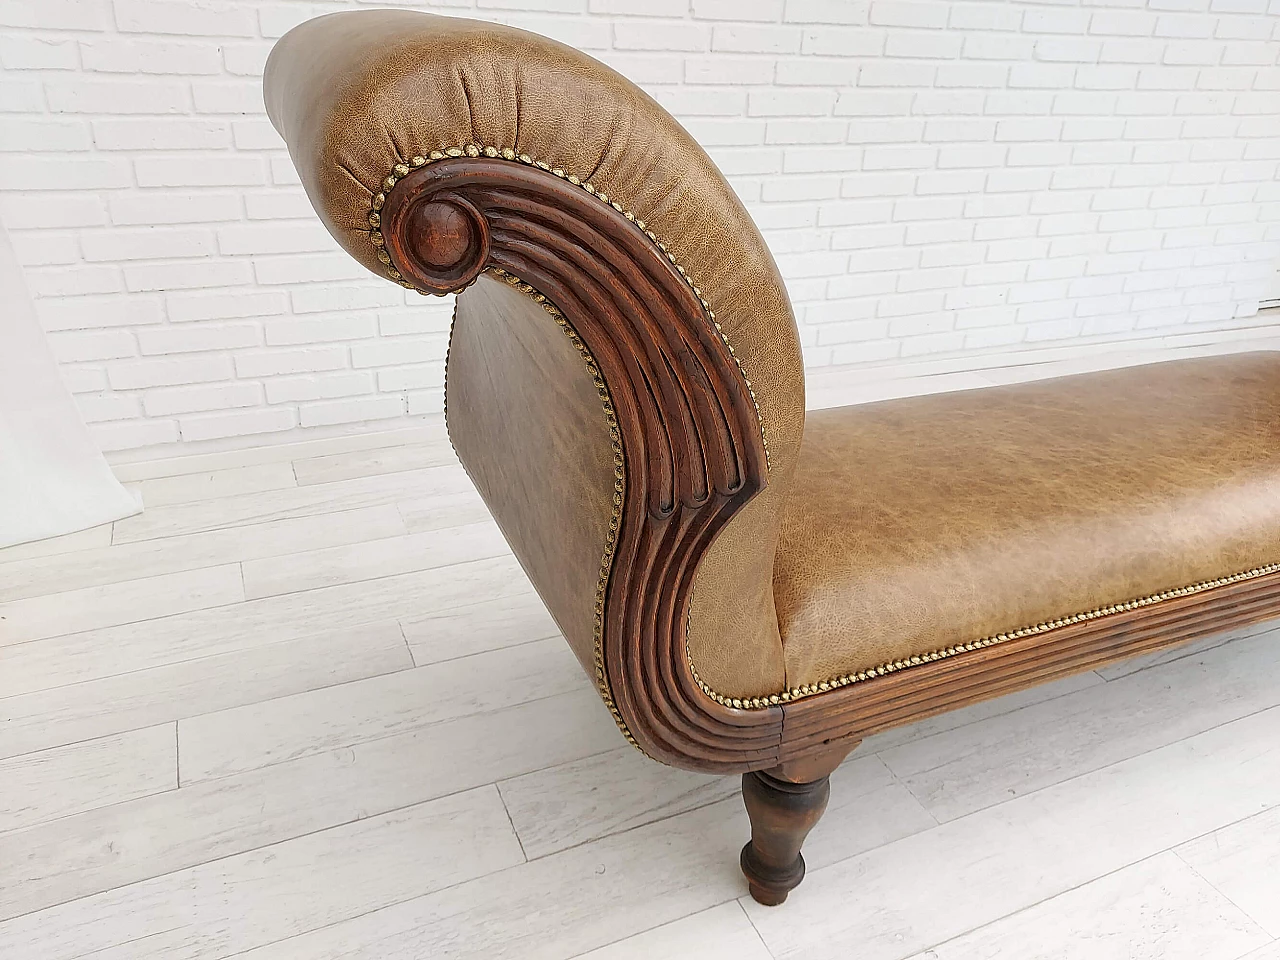 Danish antique chaise longue, early 20th century 1142174